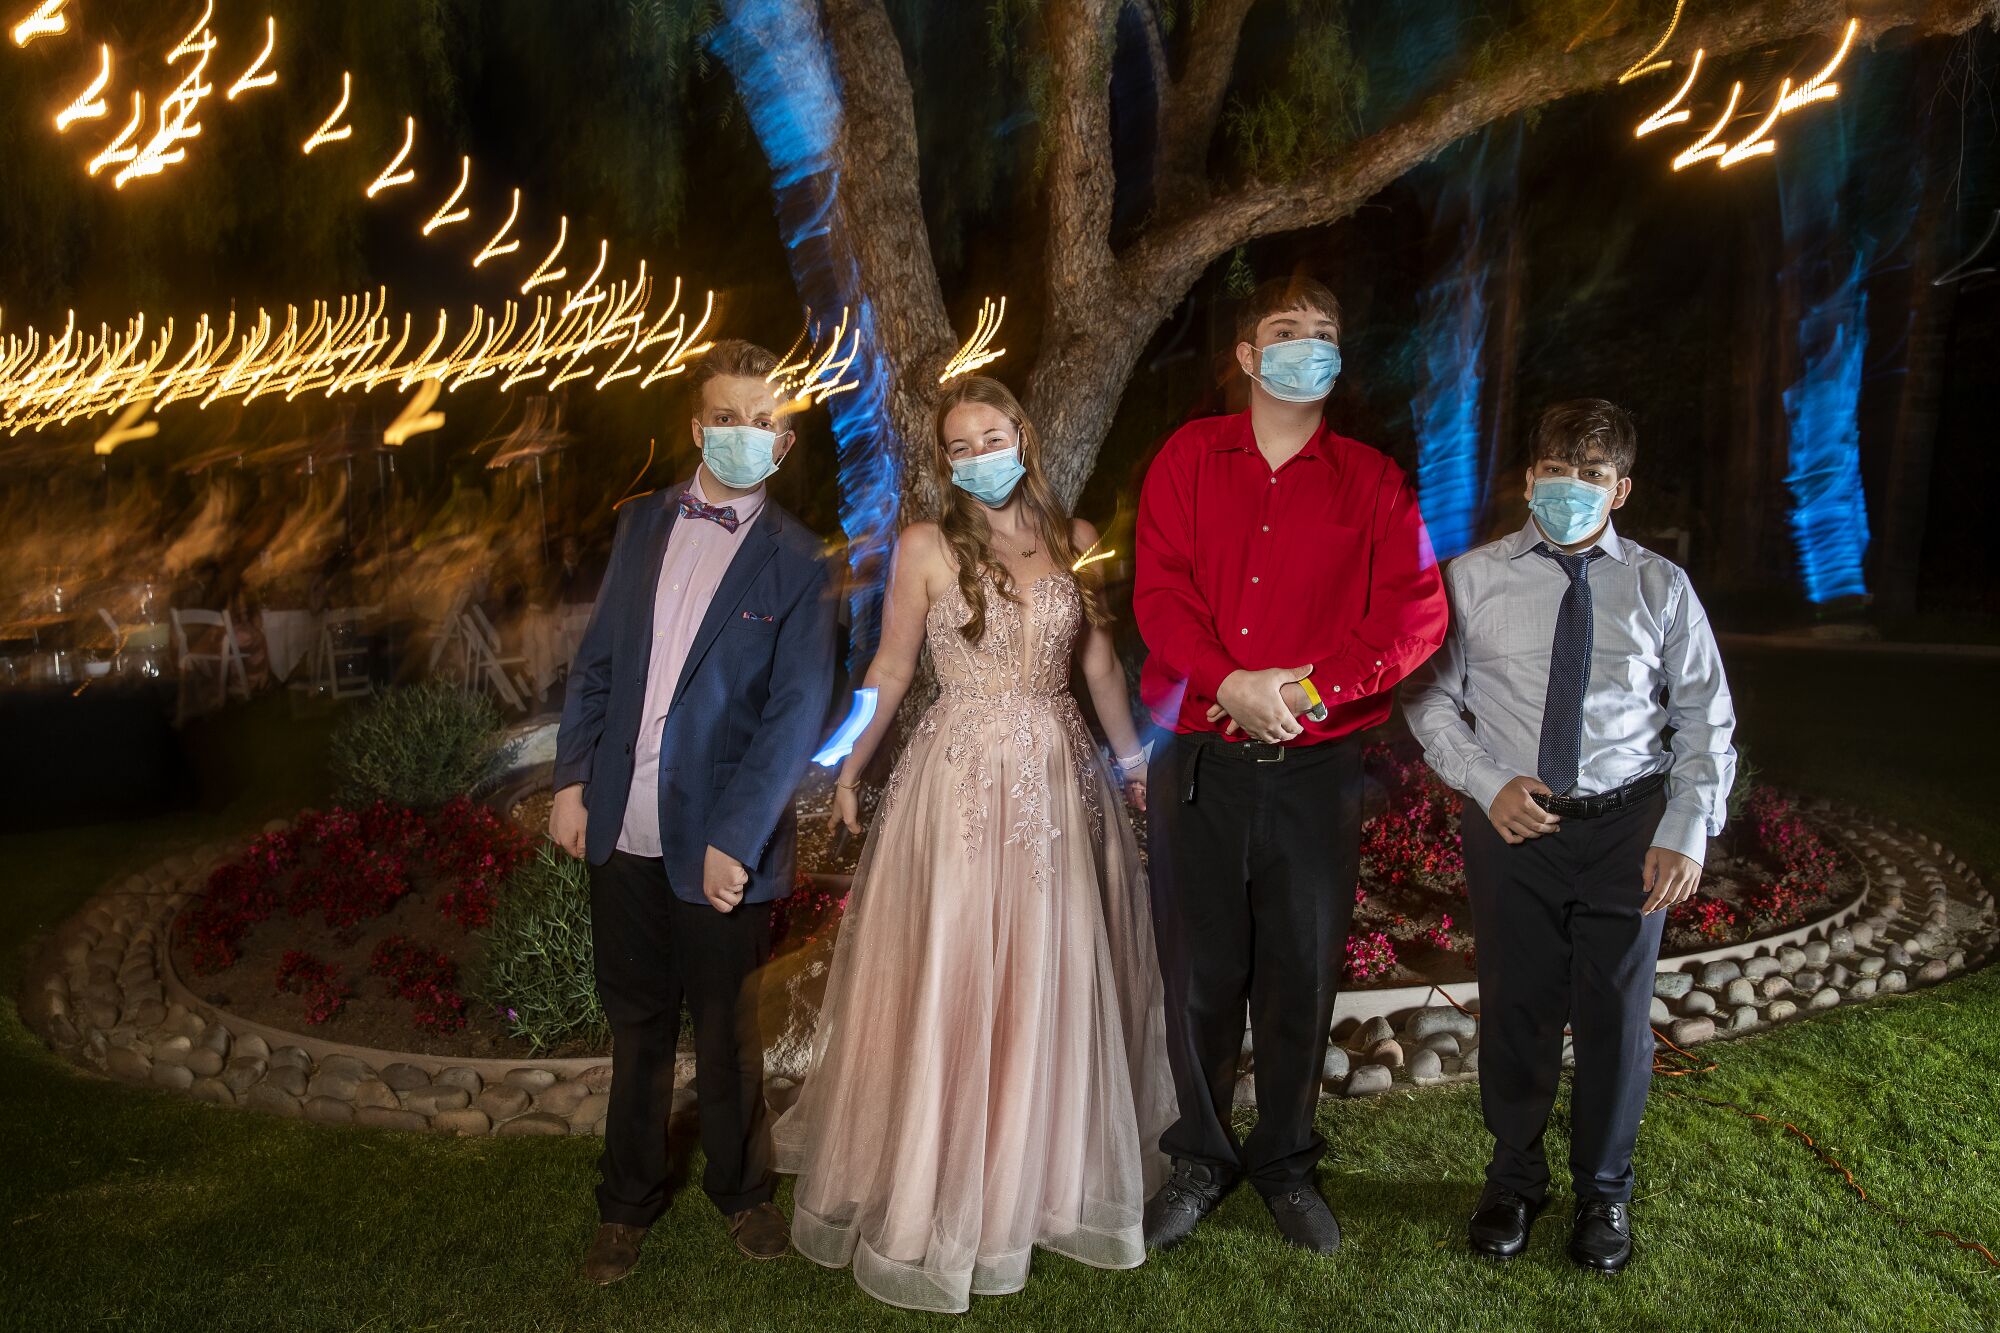 Students in formal wear and masks in front of a tree with lights.